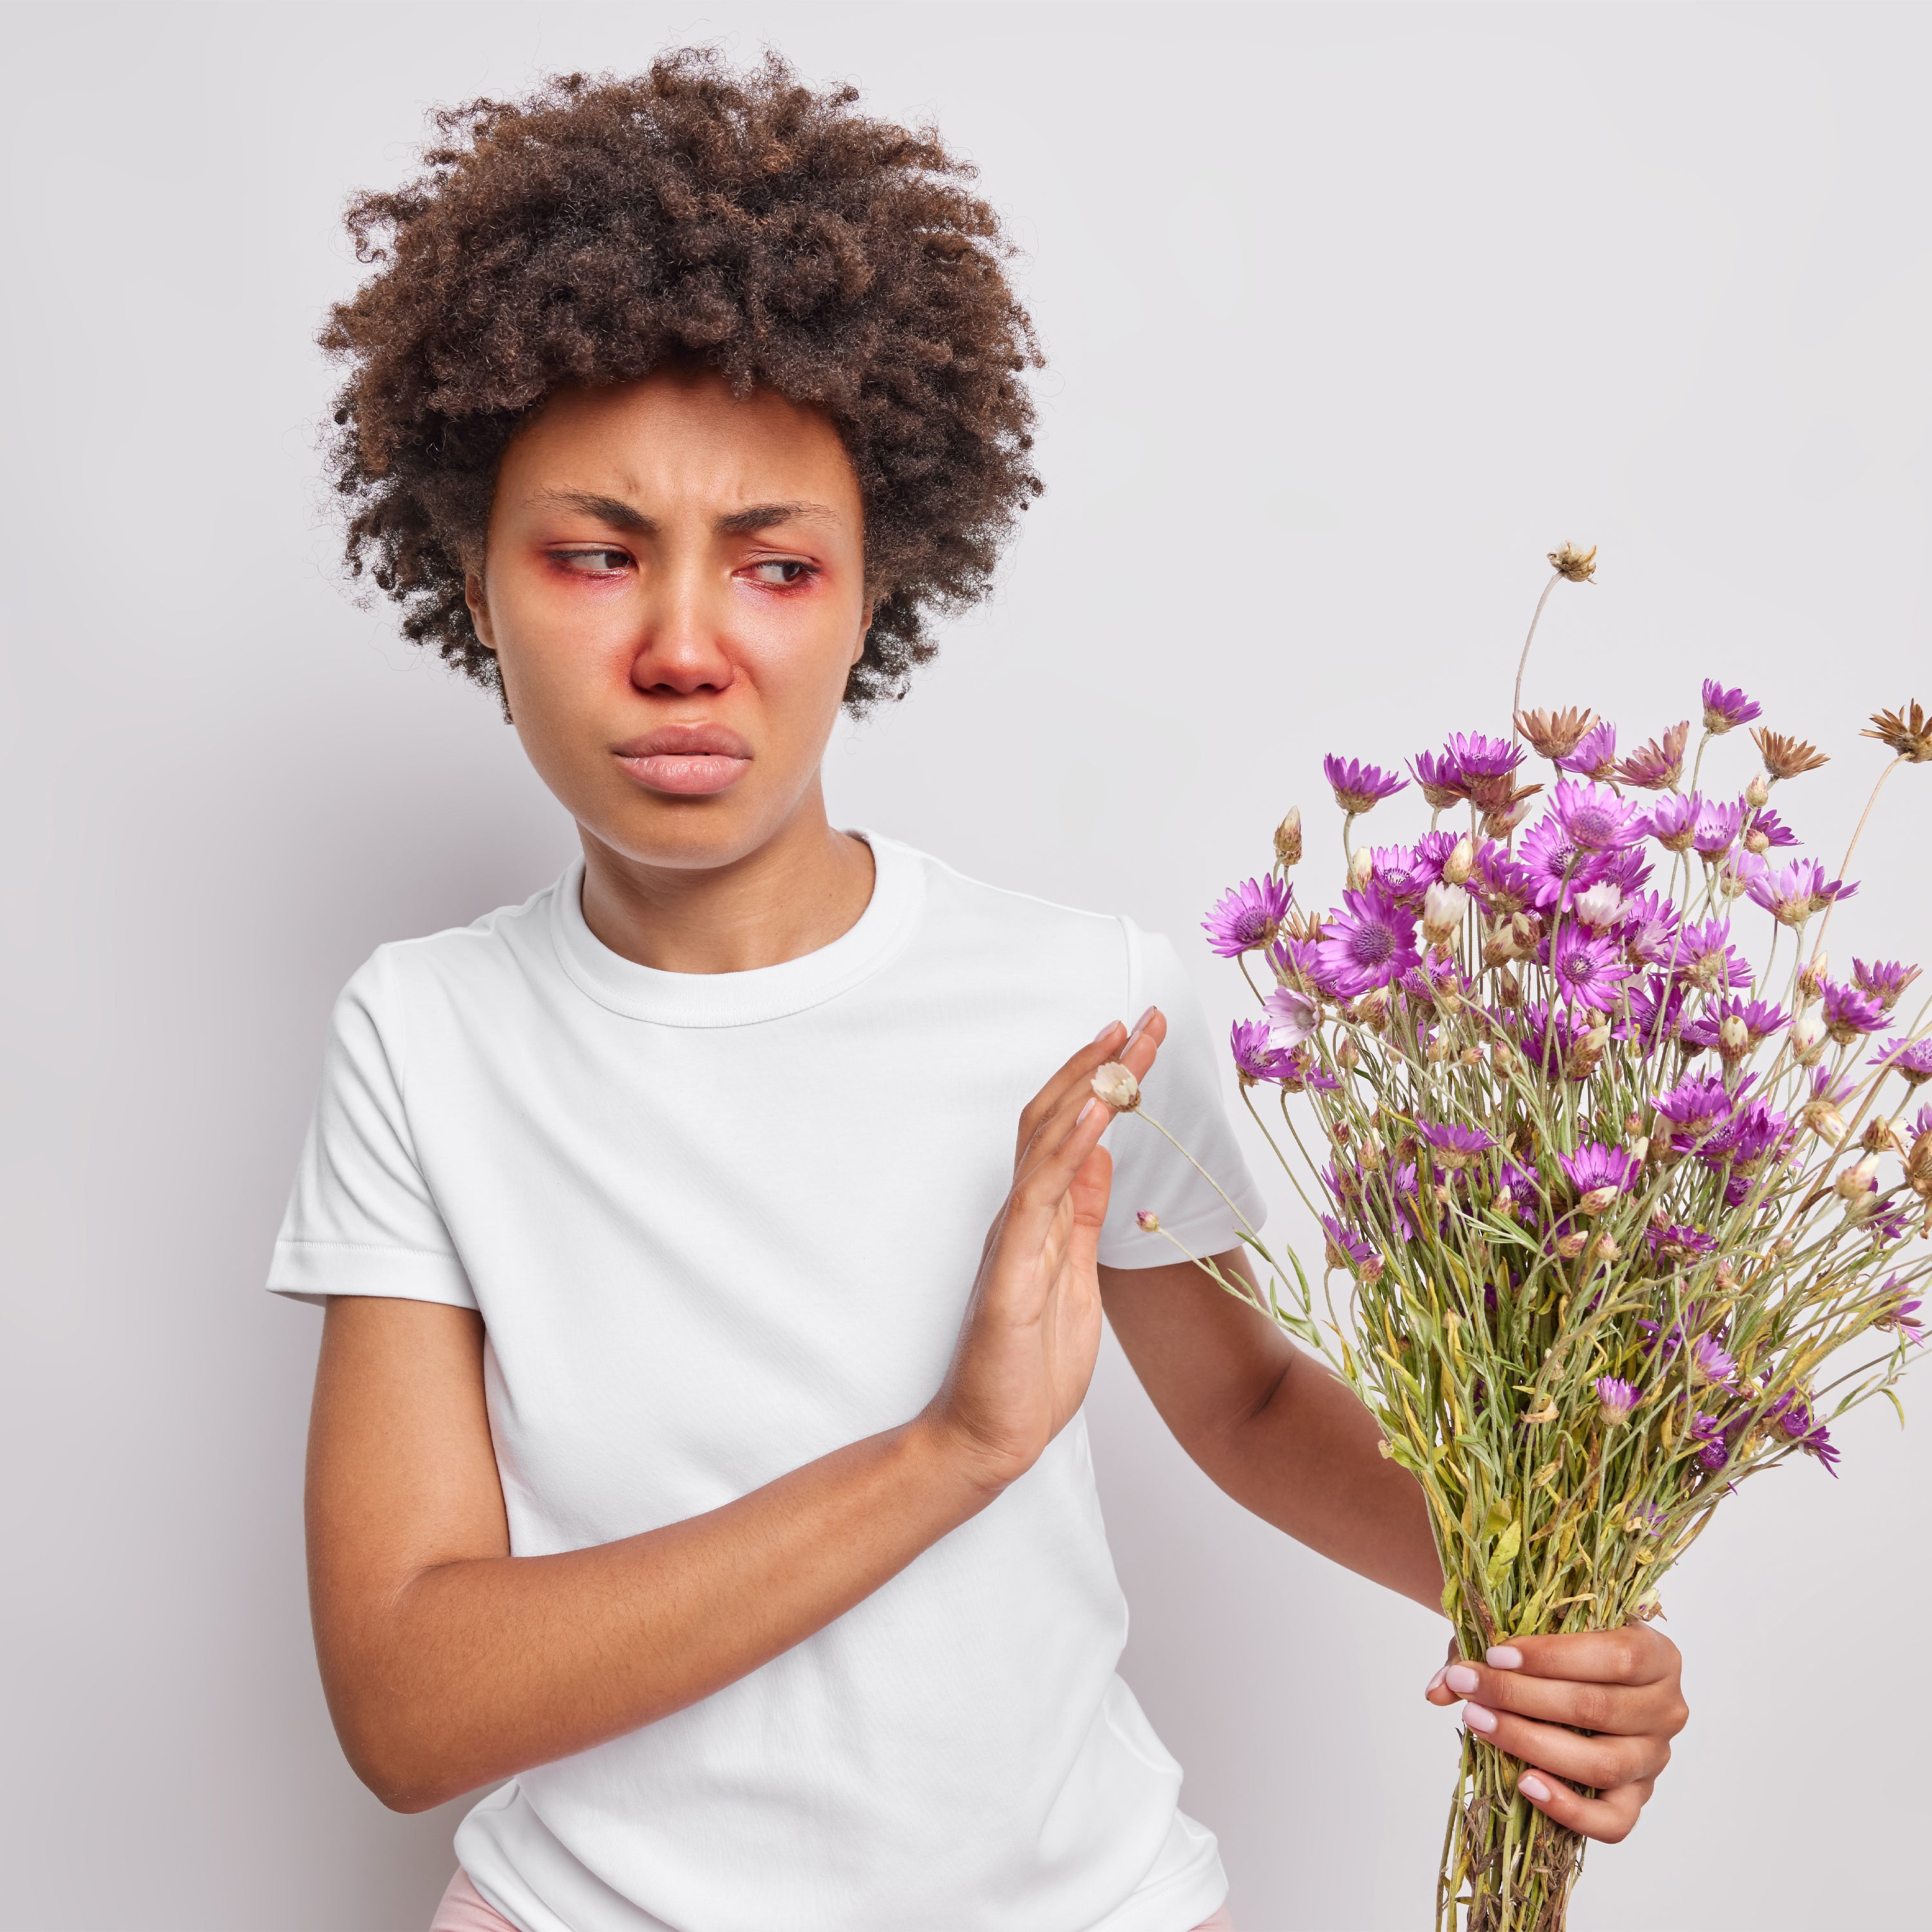 WHAT CAUSES FALL ALLERGIES? SEASONAL ALLERGY SYMPTOMS AND TREATMENT